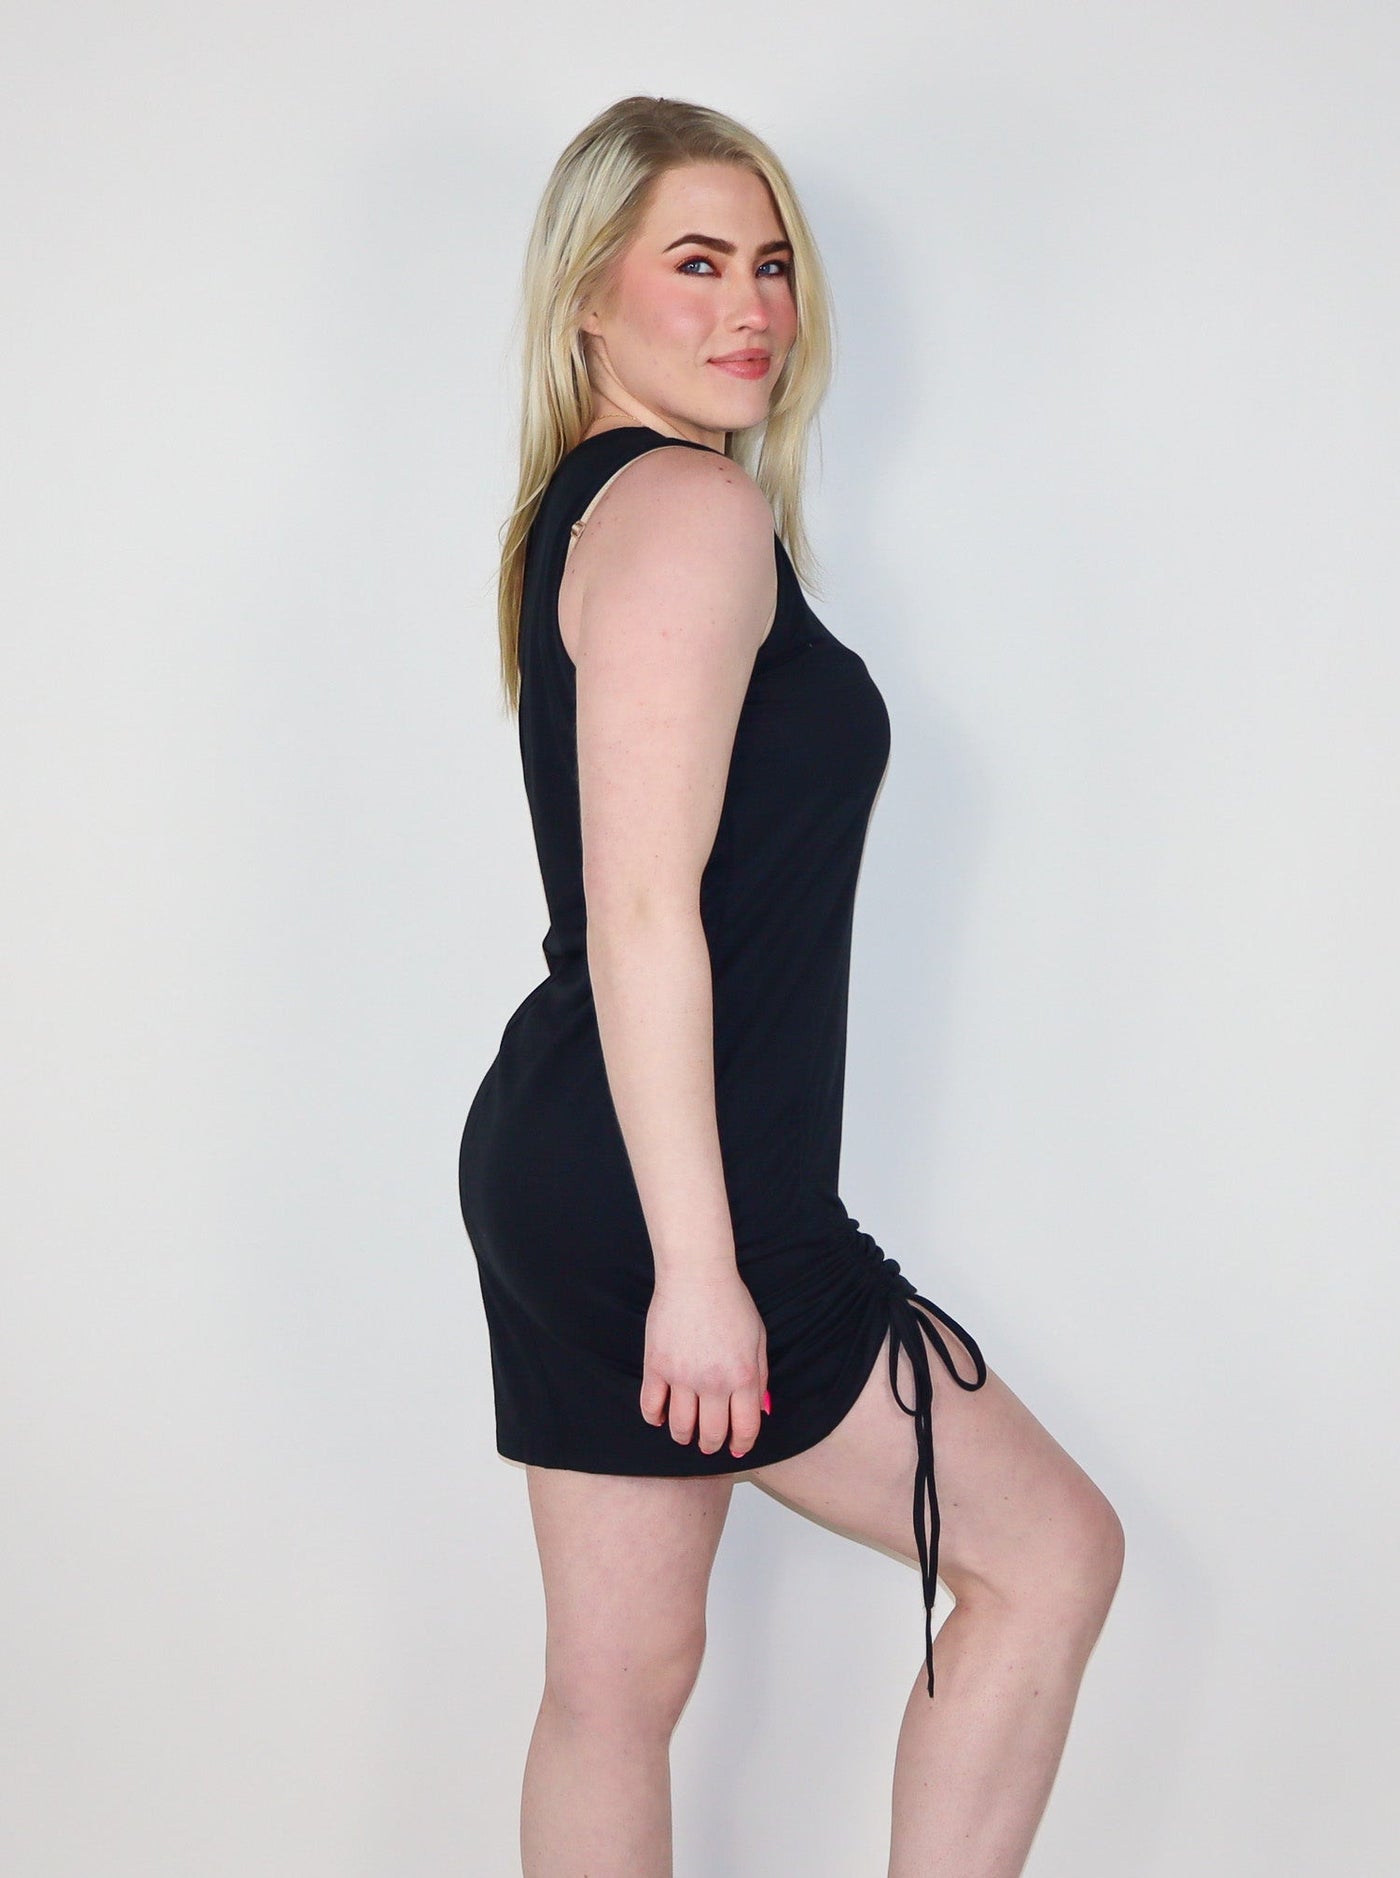 Model is wearing a fitted black sleeveless shift dress with shirring on the right thigh. Dress is worn with white tennis shoes.